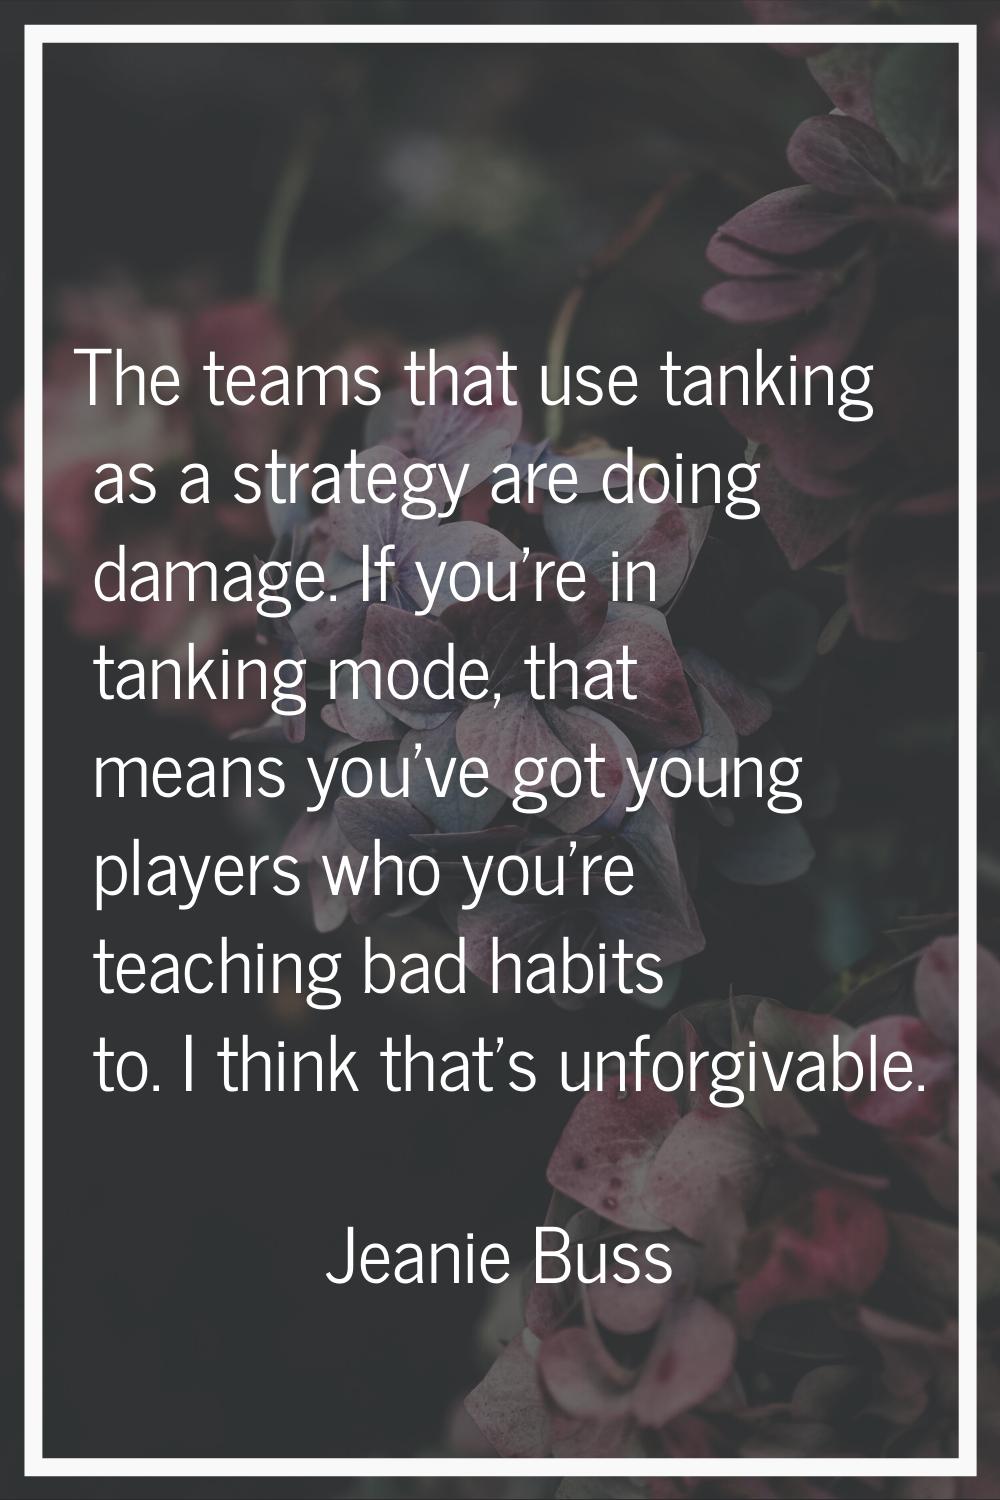 The teams that use tanking as a strategy are doing damage. If you're in tanking mode, that means yo